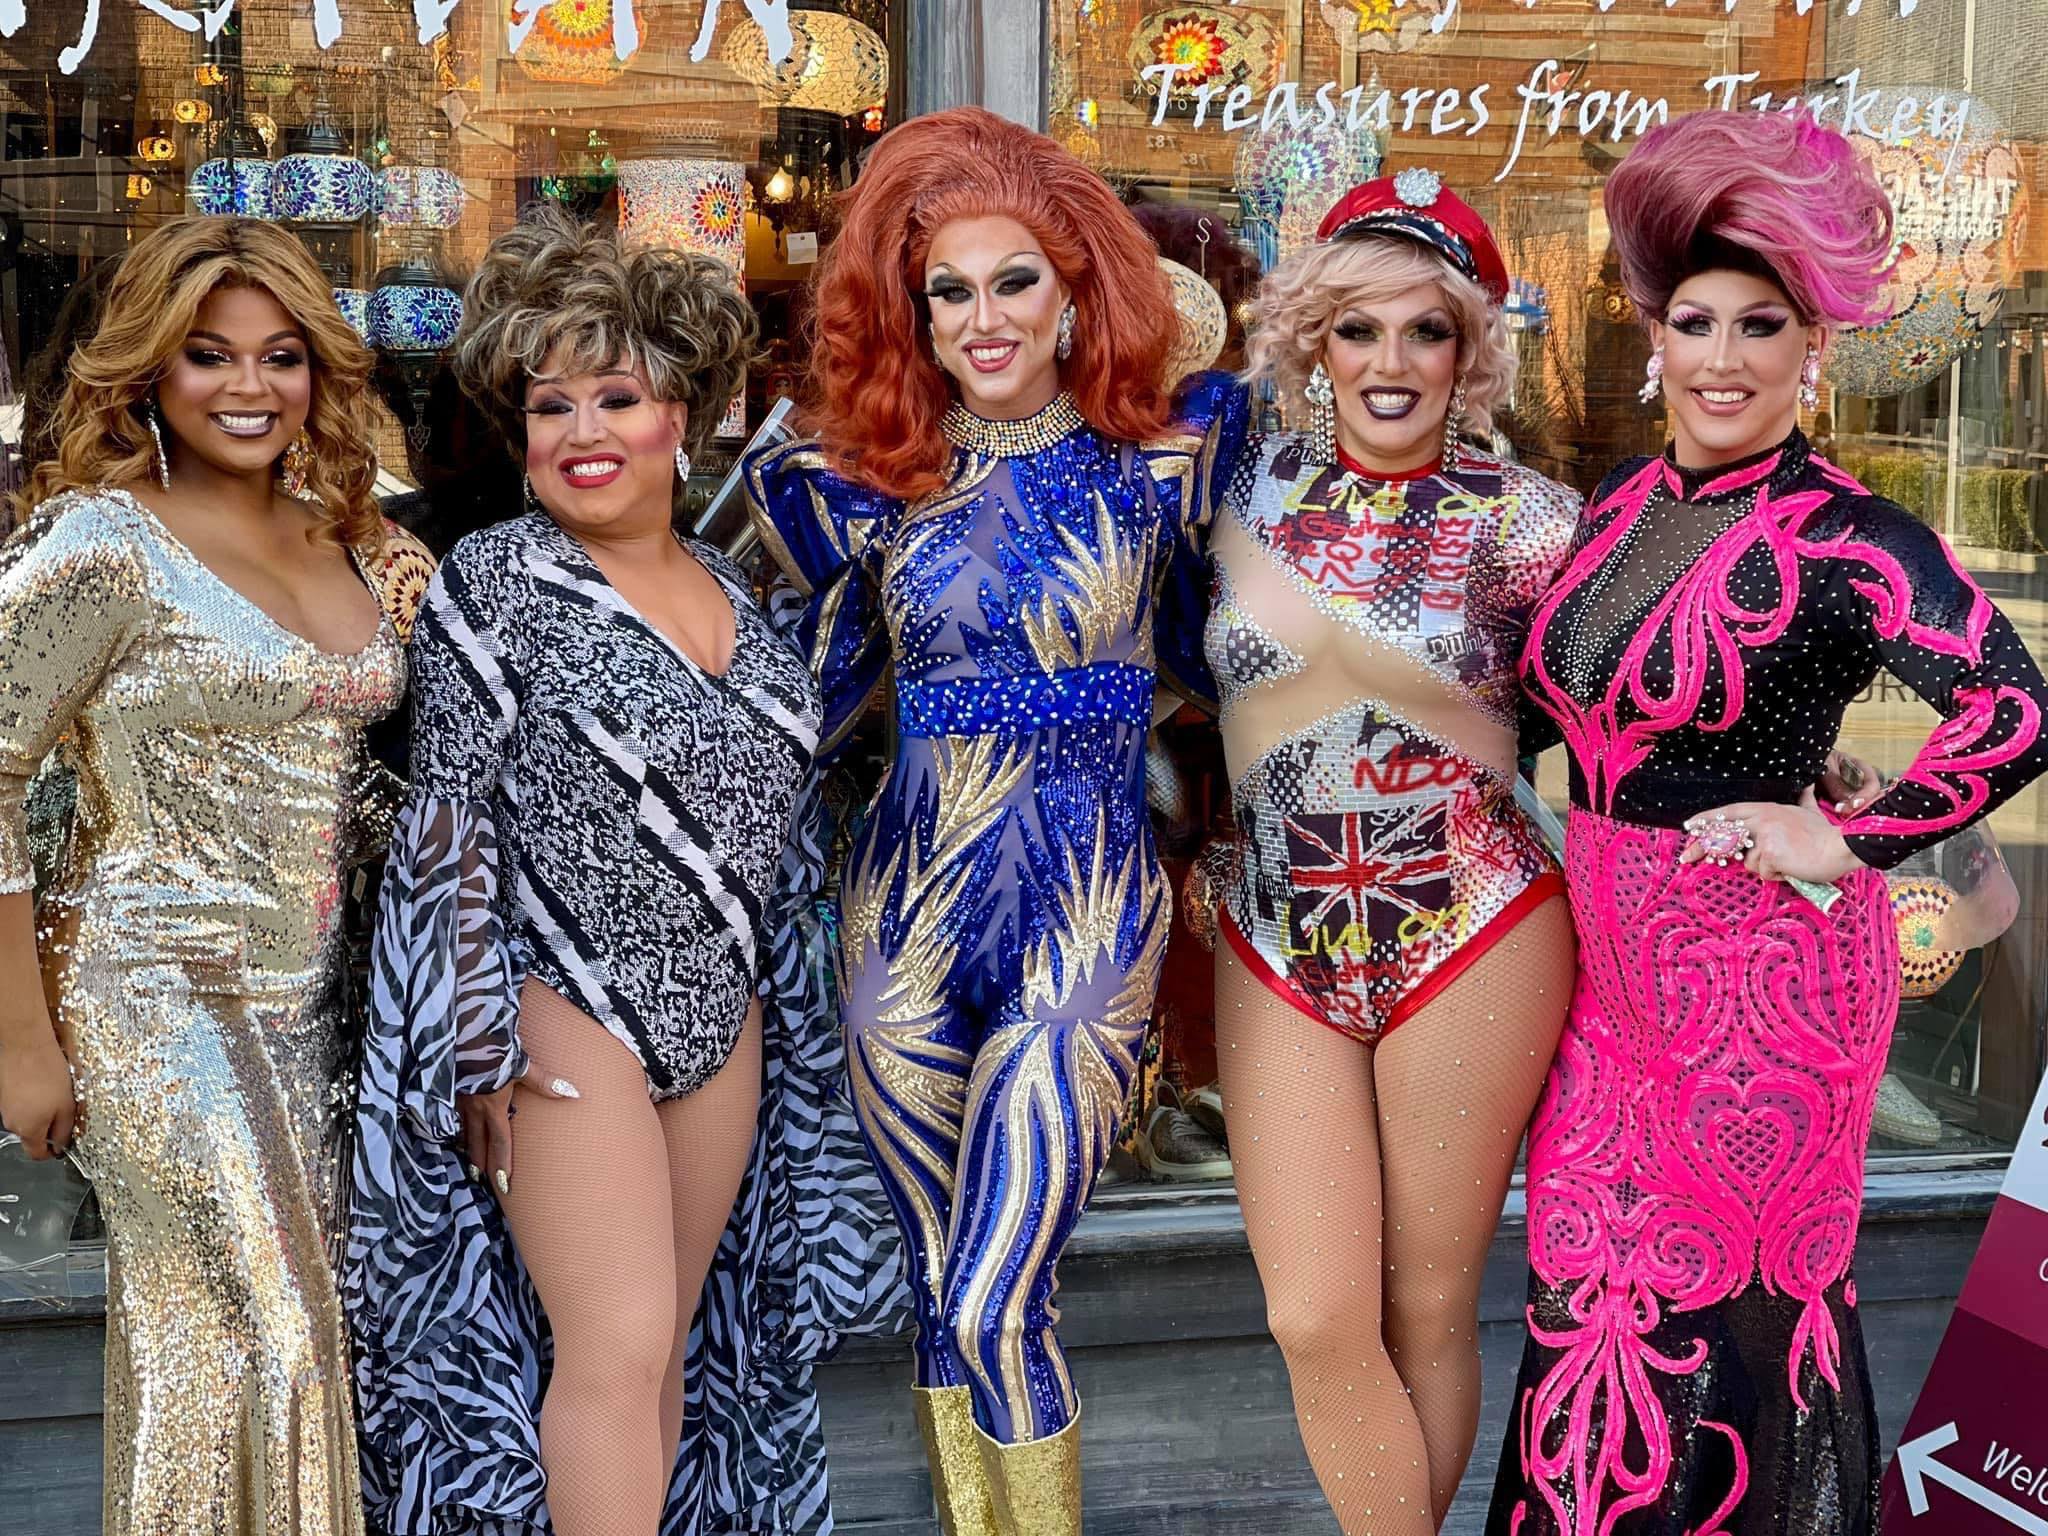 Zhané Dawlingz, Coco Vega, Deva Station, Valerie Taylor and Courtney Kelly pose in front of the Karavan store across the street from Union Cafe as the girls were getting ready at the nearby Axis Nightclub. | January 2021